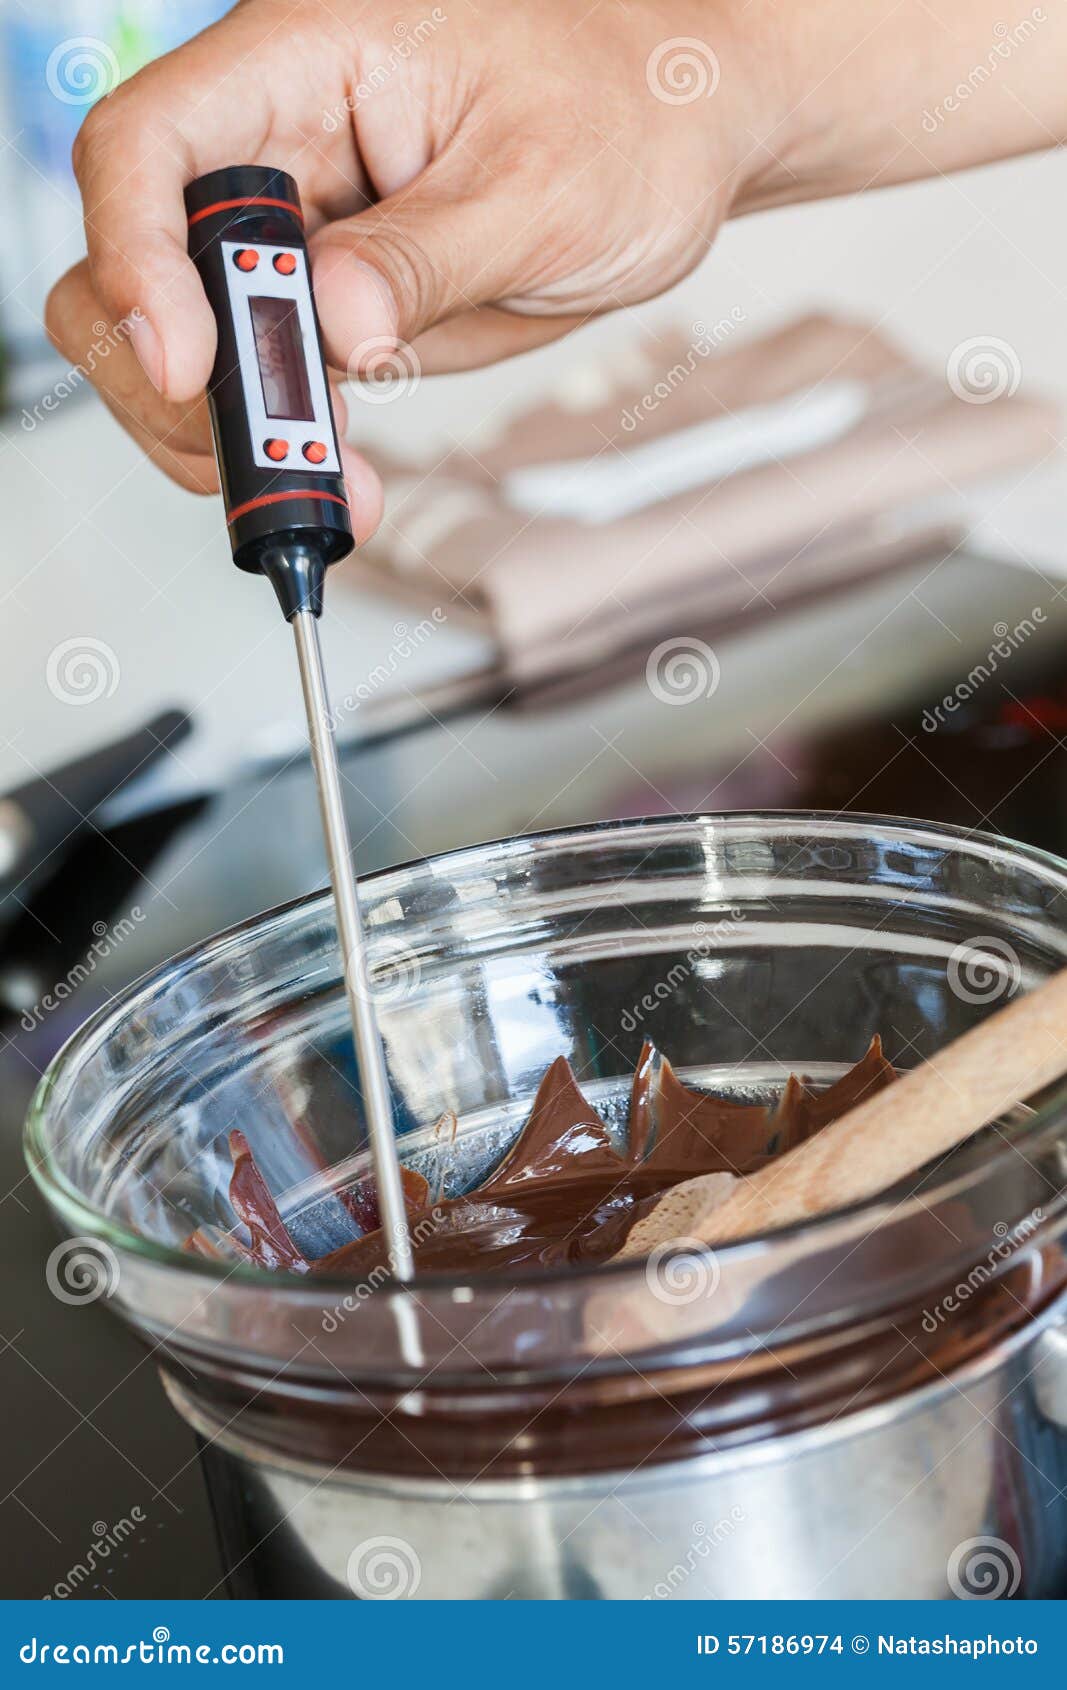 Tempering Chocolate Step 2/7 Stock Photo - Image of people, melted: 57186974